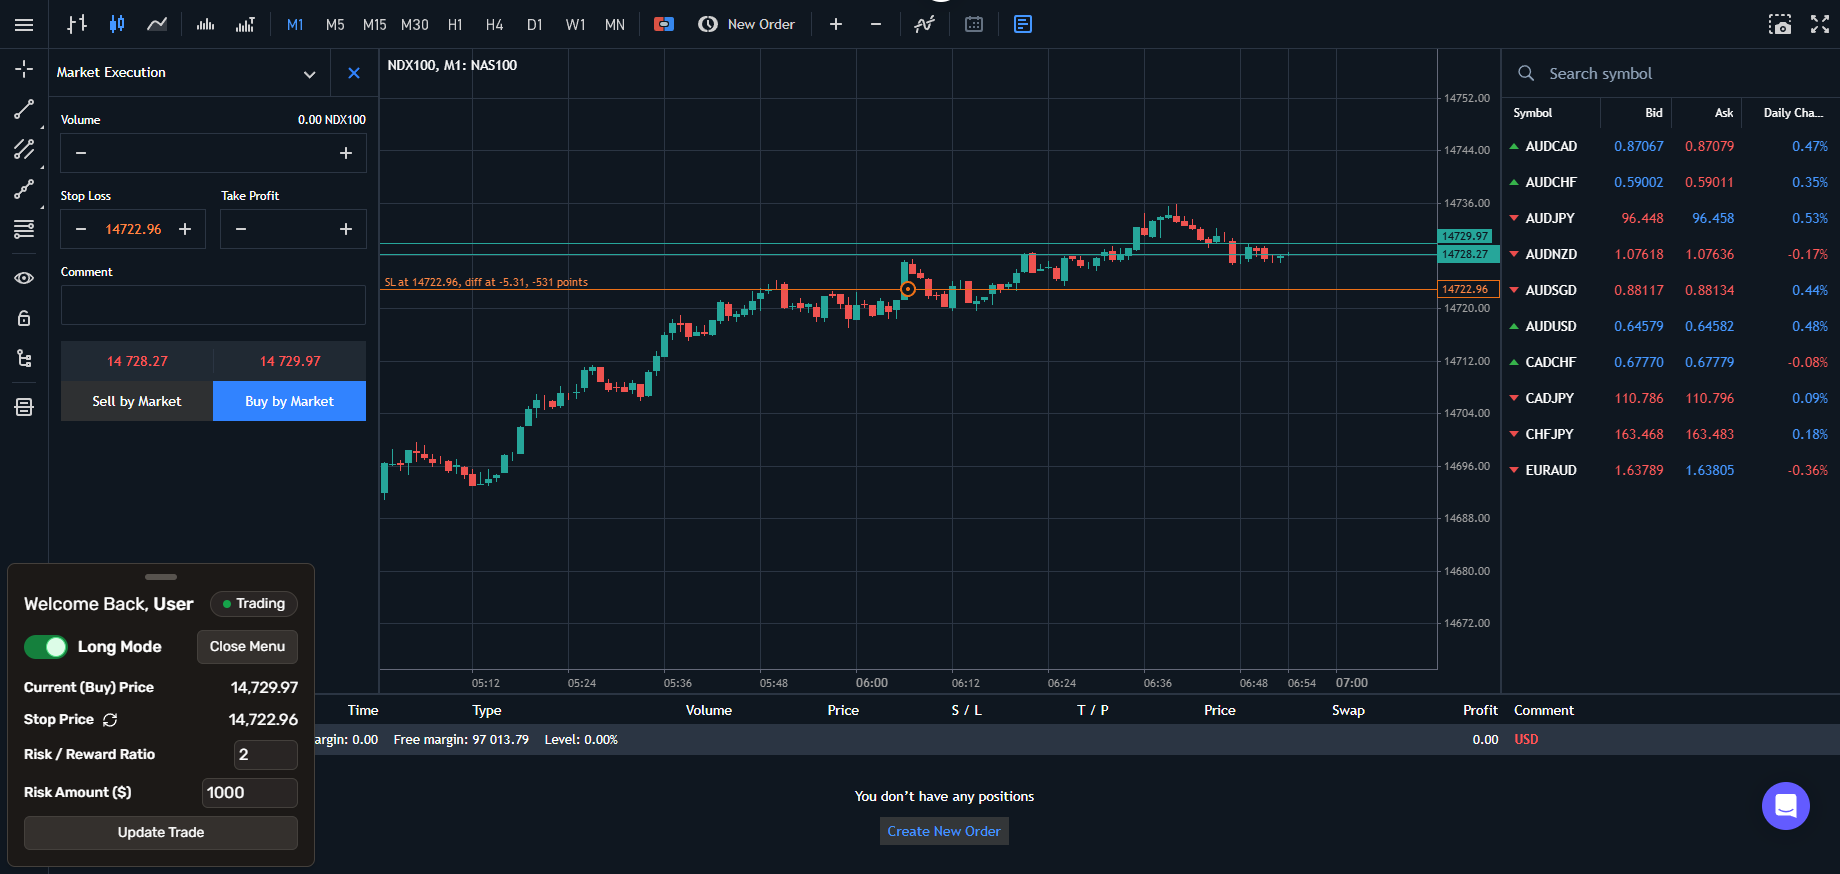 Screenshot of Trading Screen in Long Mode with a stop loss